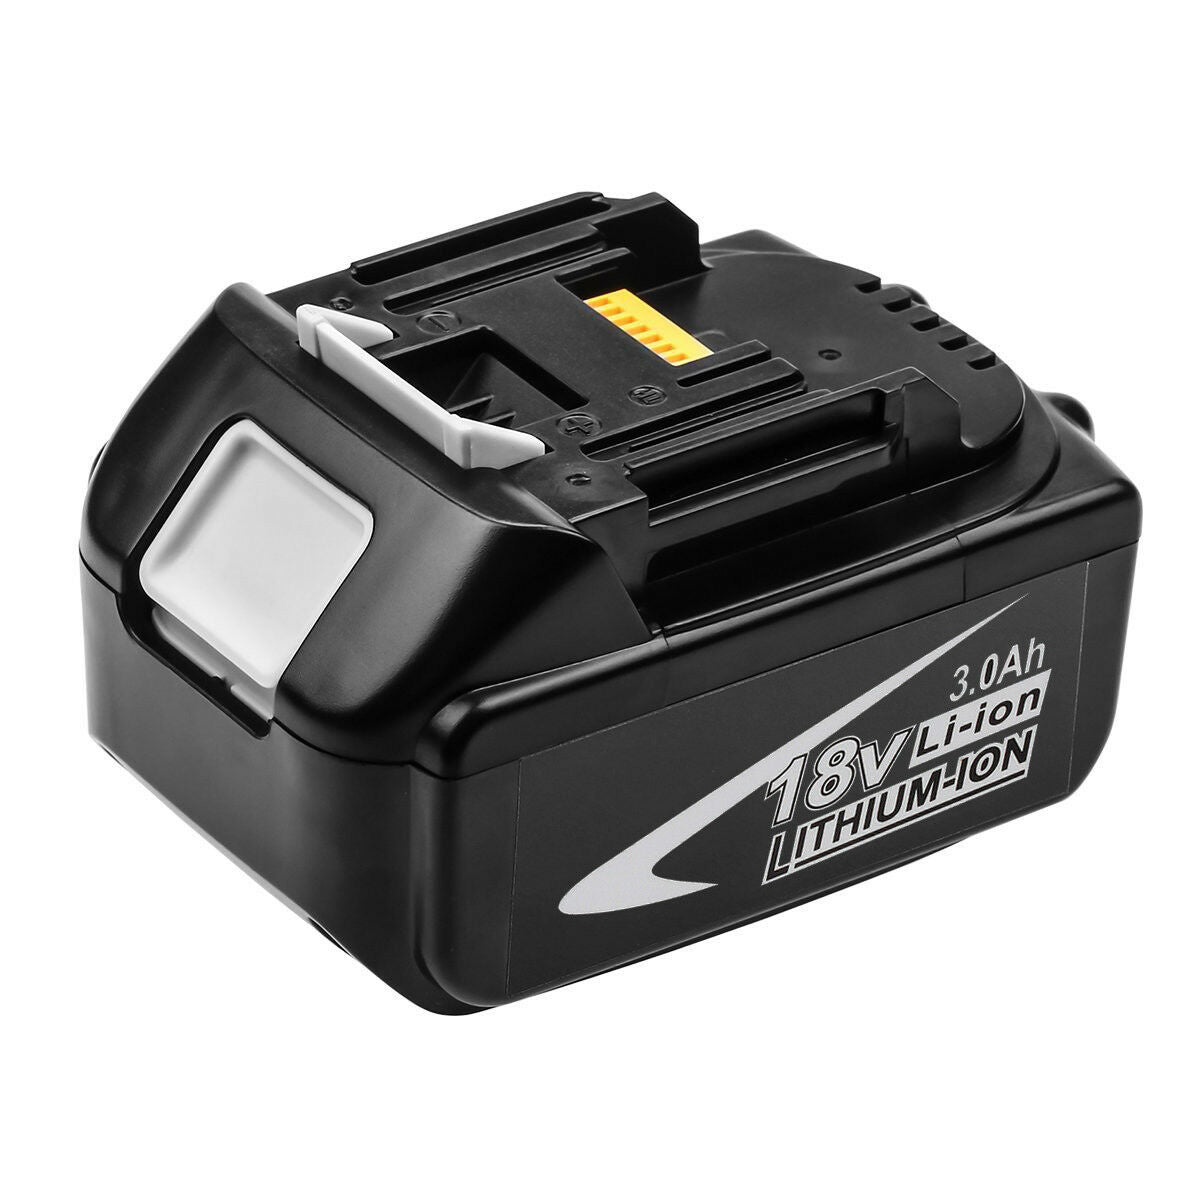 For MAKITA 18V Battery Replacement